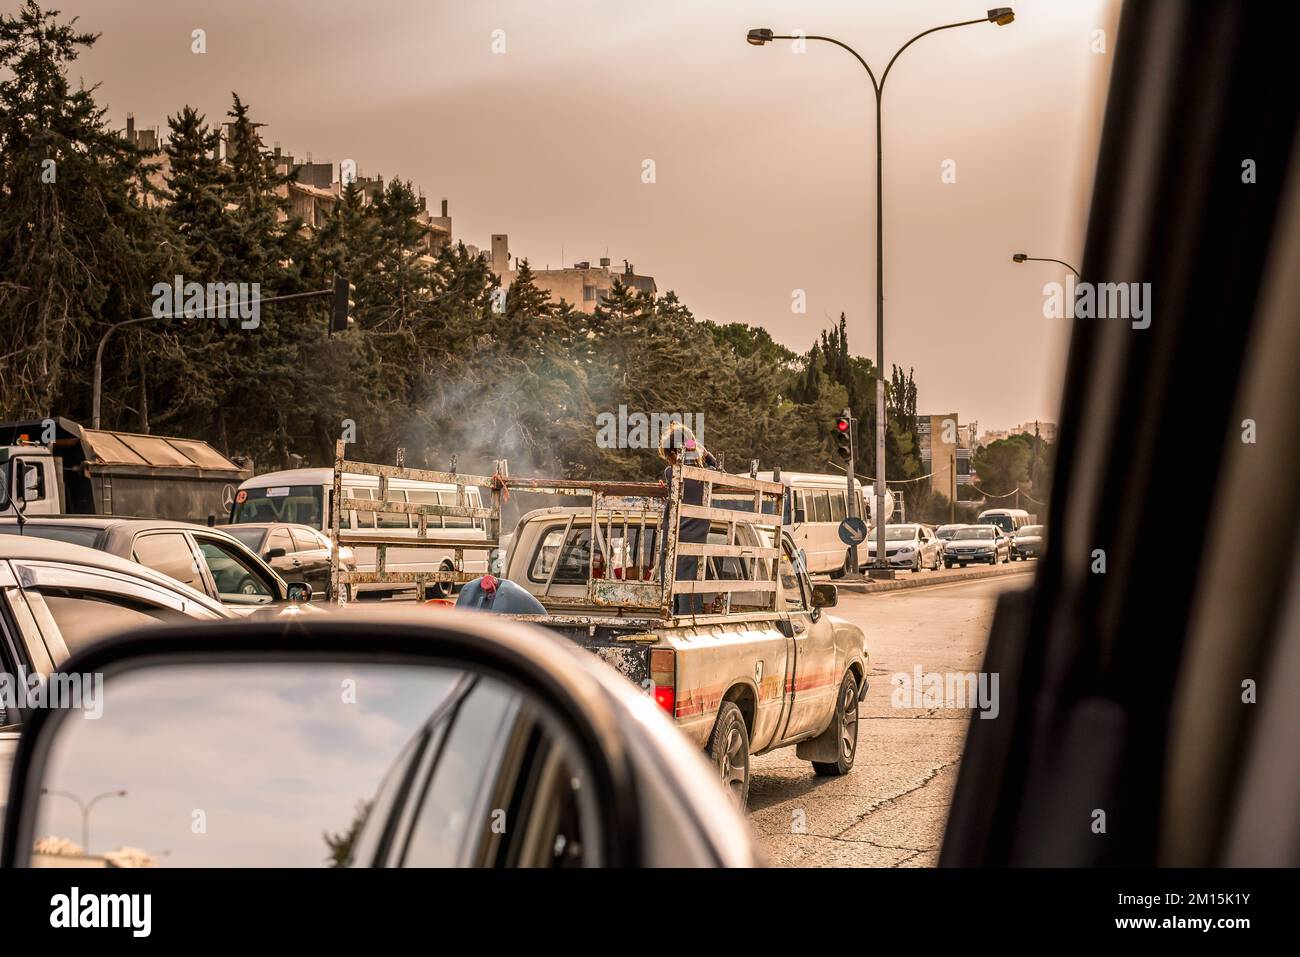 Amman, Jordan - Thursday, February 06 2018 girl in pick up truck car traffic at sunset in amman streets, view from inside the car Stock Photo